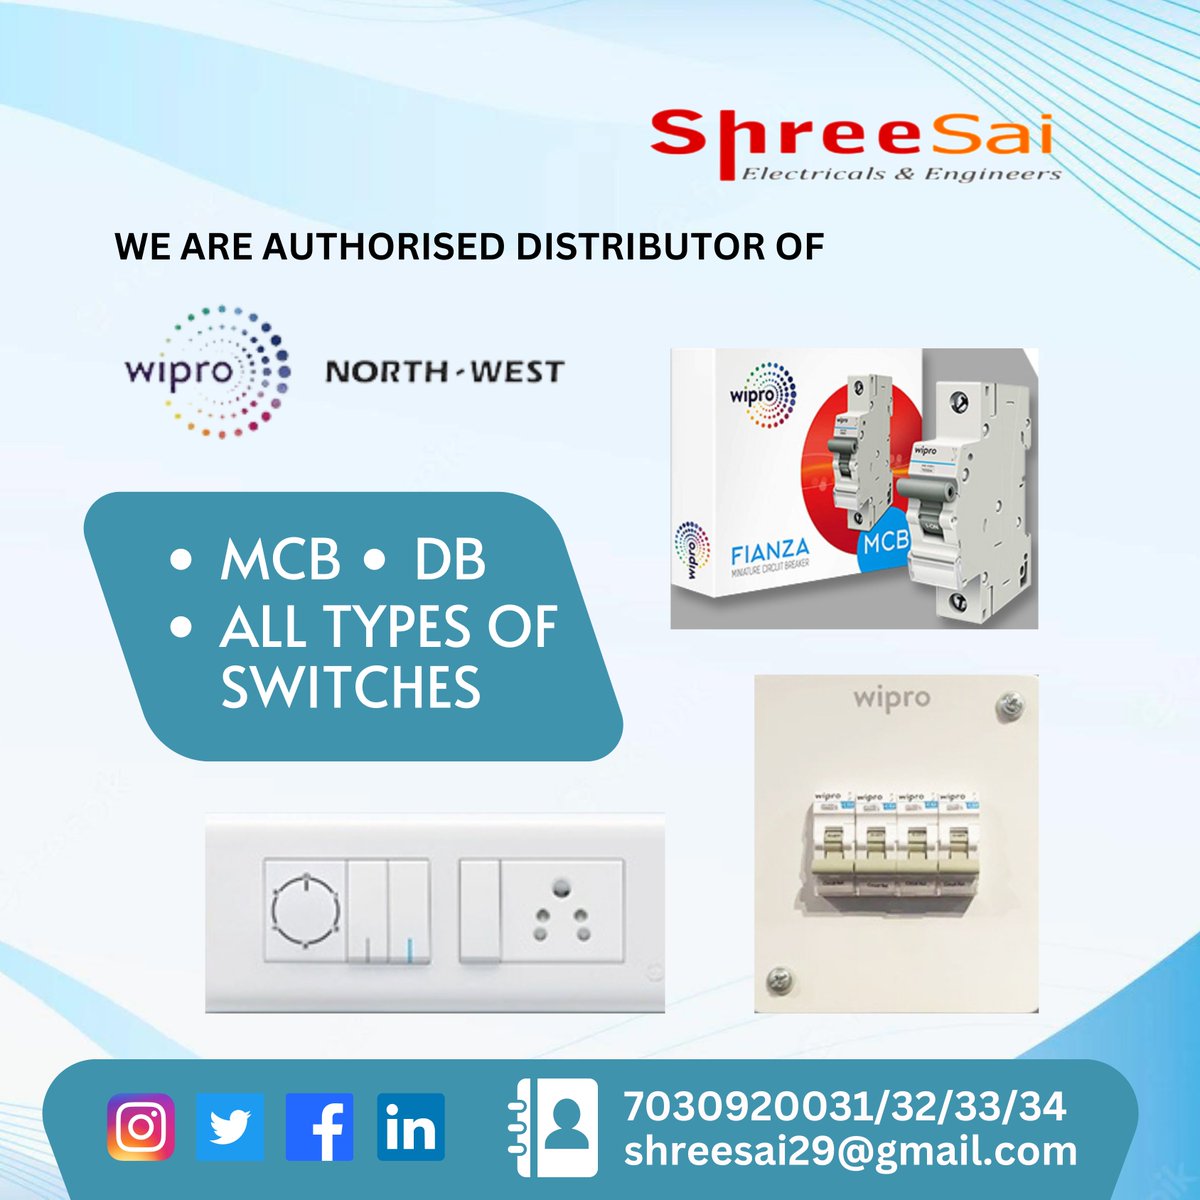 '💡👉🏻We are the Authorized Channel Partners for Wipro Lighting & Wipro Northwest Switches.

Don't hesitate to call us anytime. We will give you special discounts. 💸
Call us at 7030920033📲
📩shreesai29@gmail.com

#Sustainability #AmbitionsRealized #OneWipro #Wipro #WiproLighting